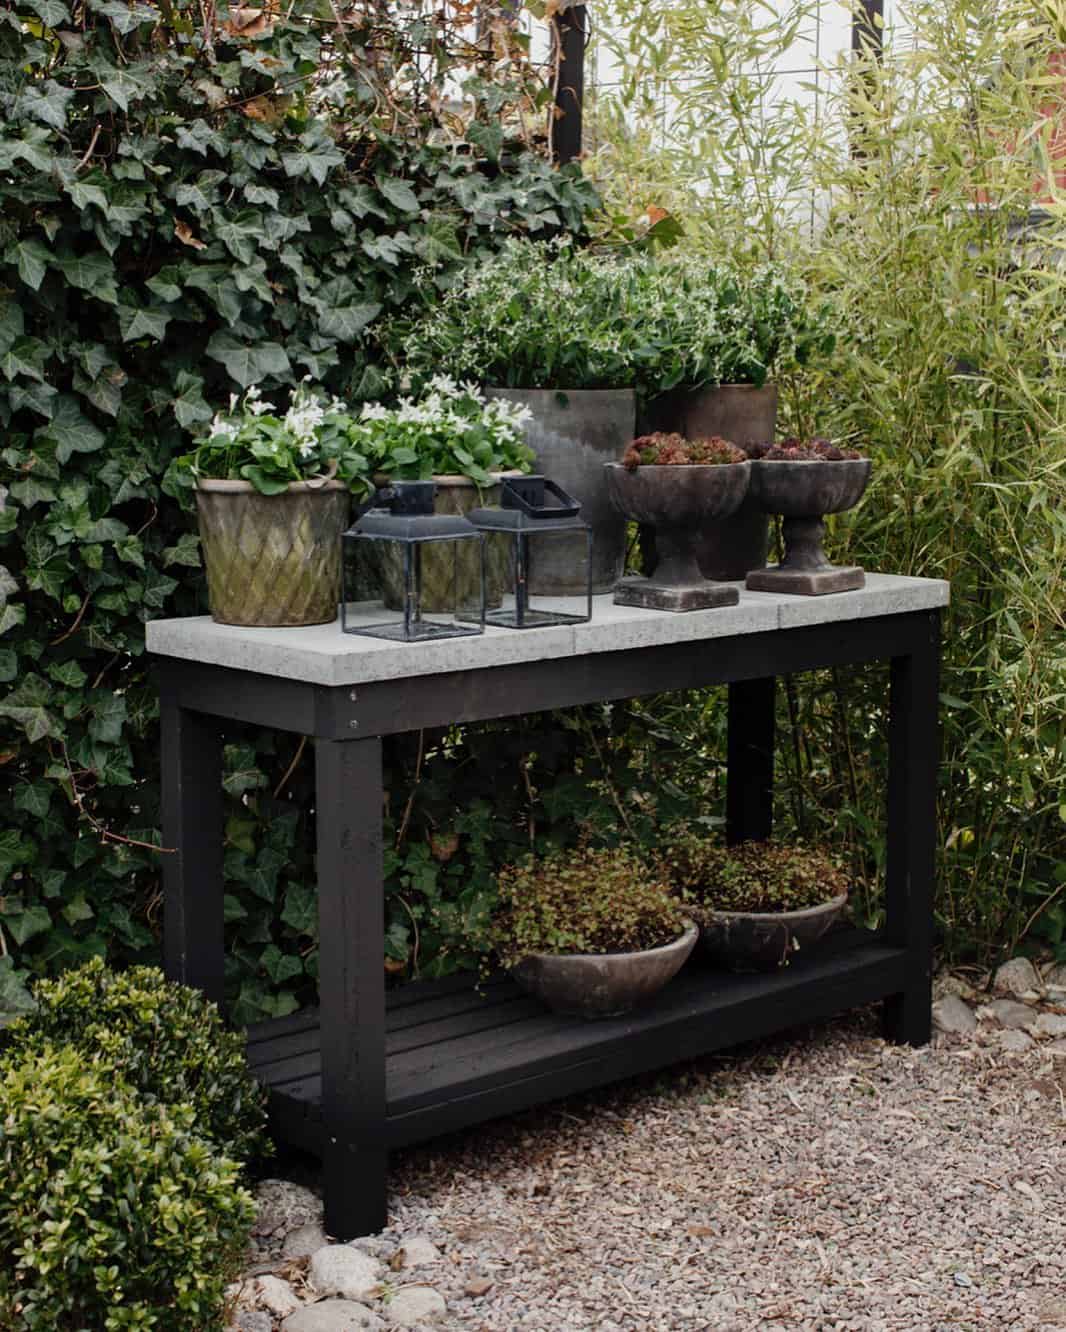 A variety of potted plants displayed on and underneath a black outdoor table, surrounded by garden foliage.